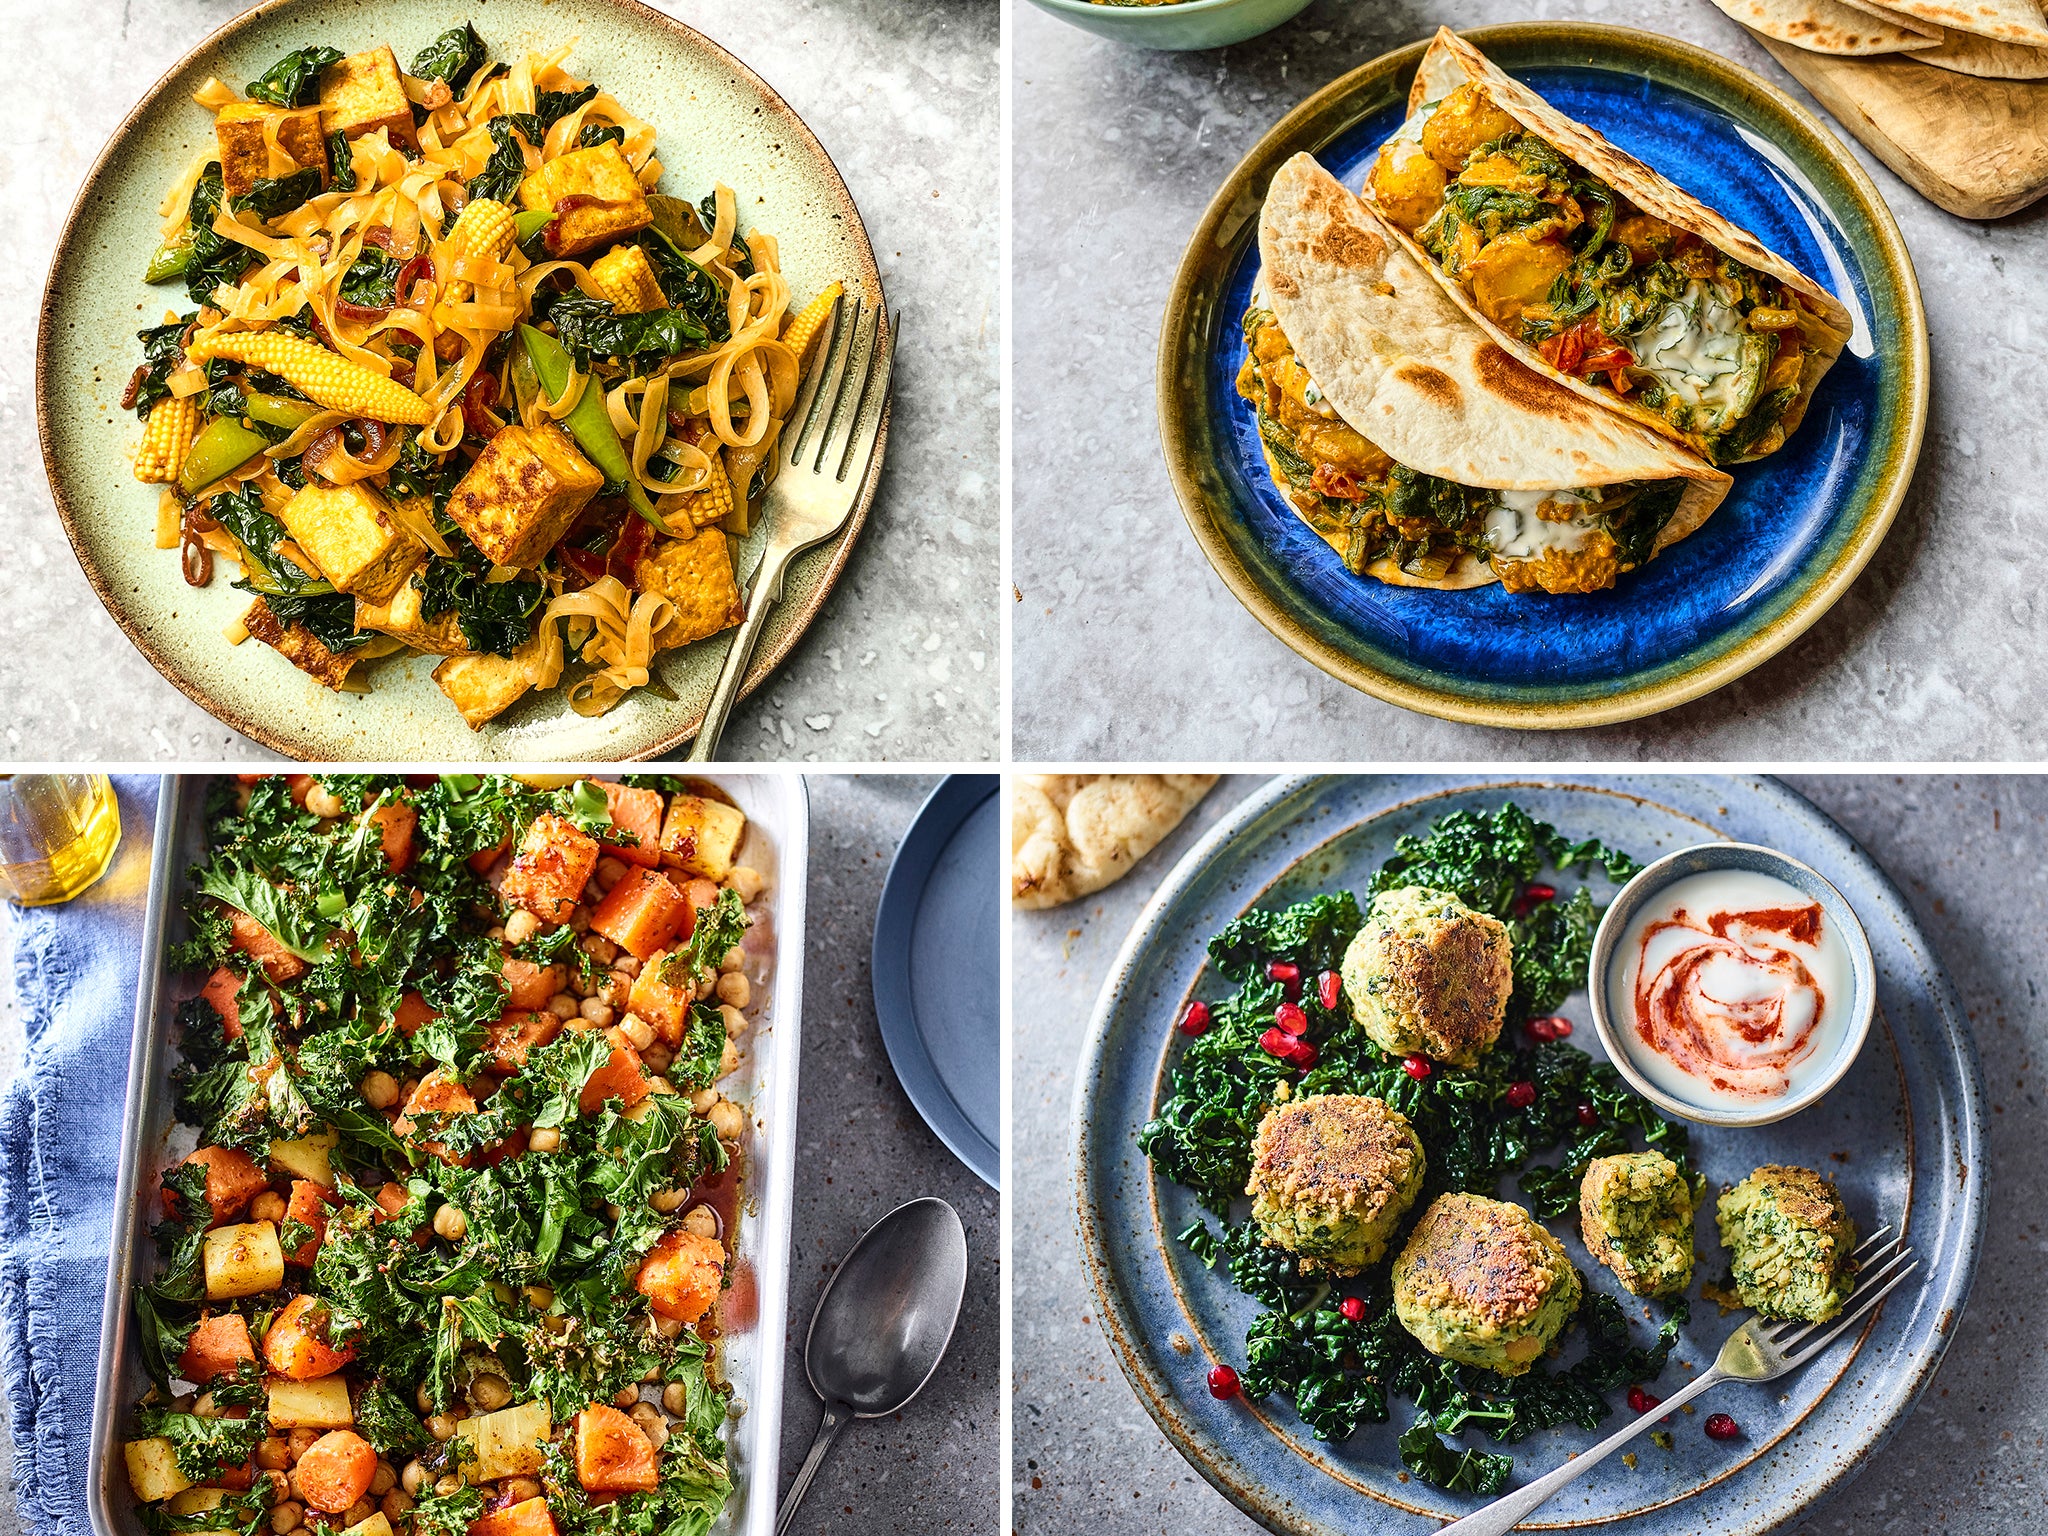 Veganuary never looked so delicious (or easy)